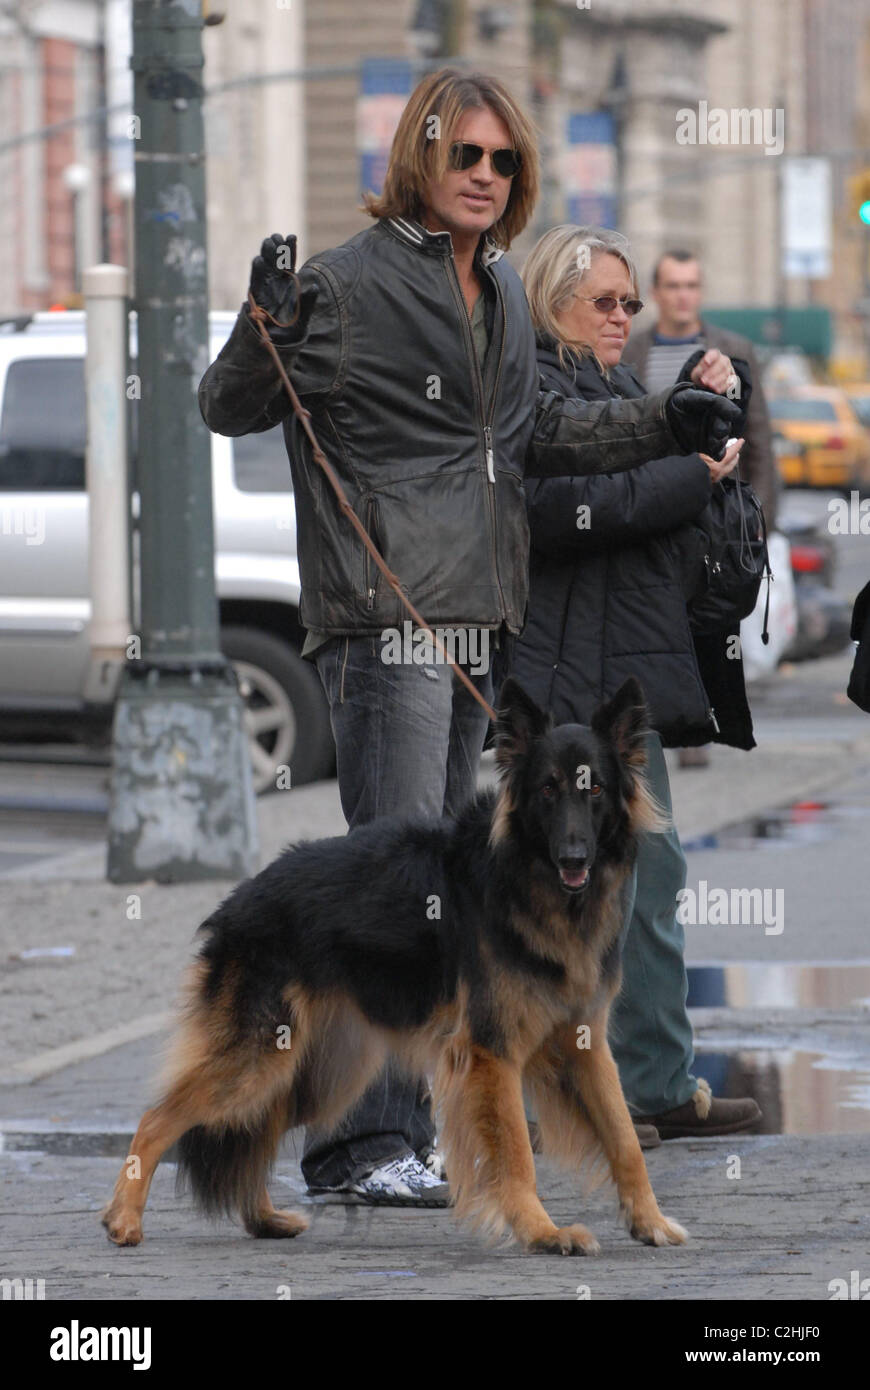 Billy Ray Cyrus out walking his dog near Central Park New York City, USA -  29.12.07 Stock Photo - Alamy